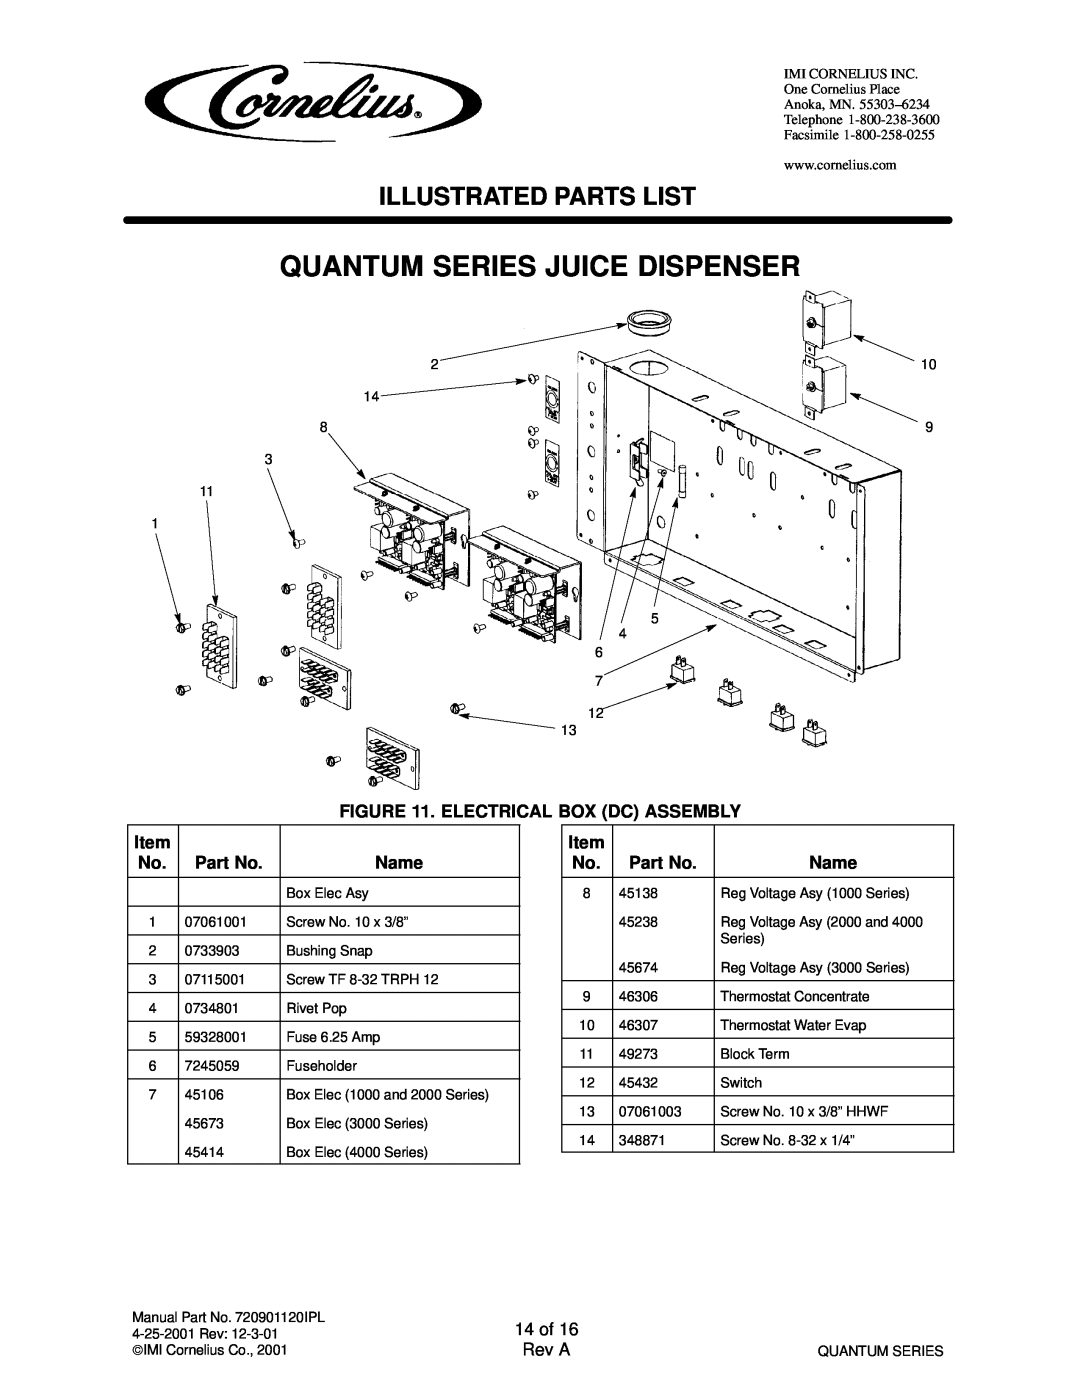 Panasonic 45200002 Quantum Series Juice Dispenser, Illustrated Parts List, Electrical Box Dc Assembly, Name, 14 of, Rev A 